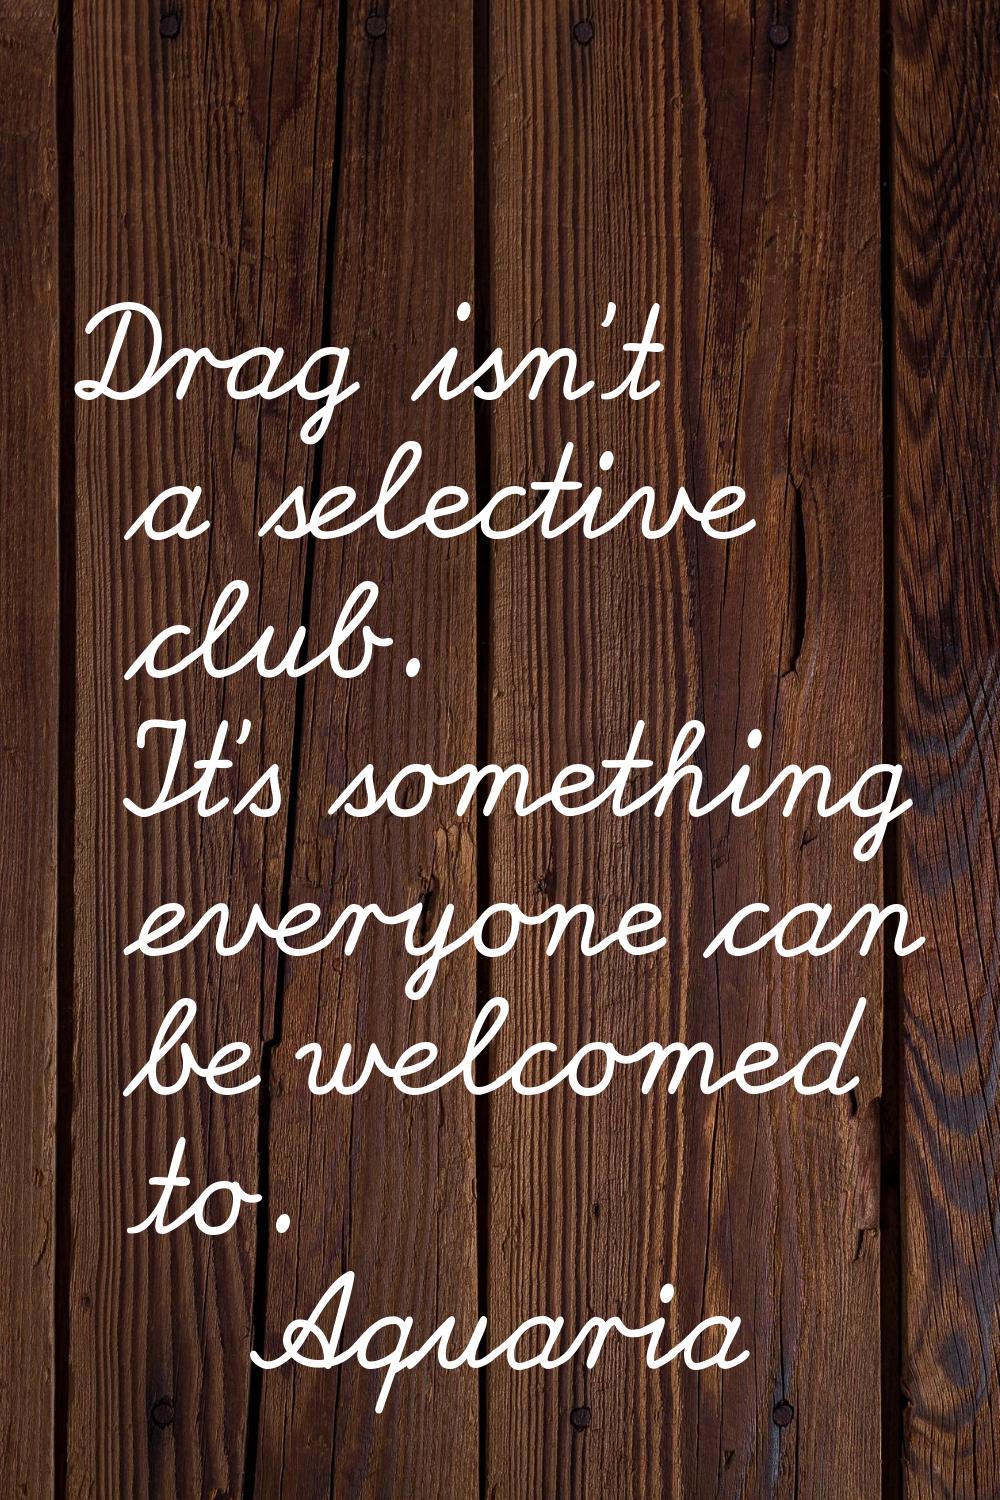 Drag isn't a selective club. It's something everyone can be welcomed to.